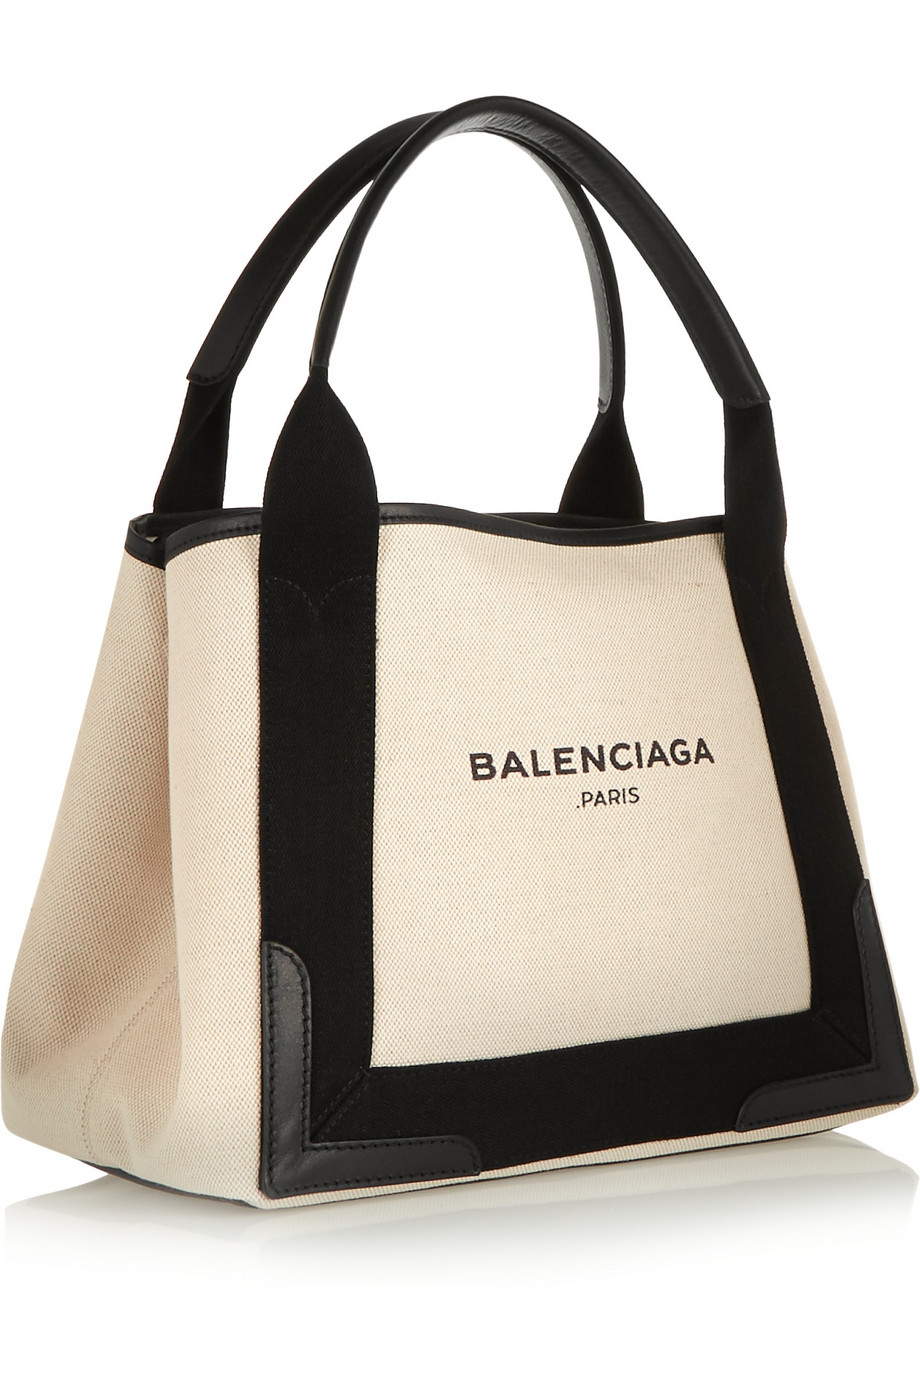 Balenciaga Cabas S Leather-Trimmed Cotton-Canvas Tote in White | Lyst